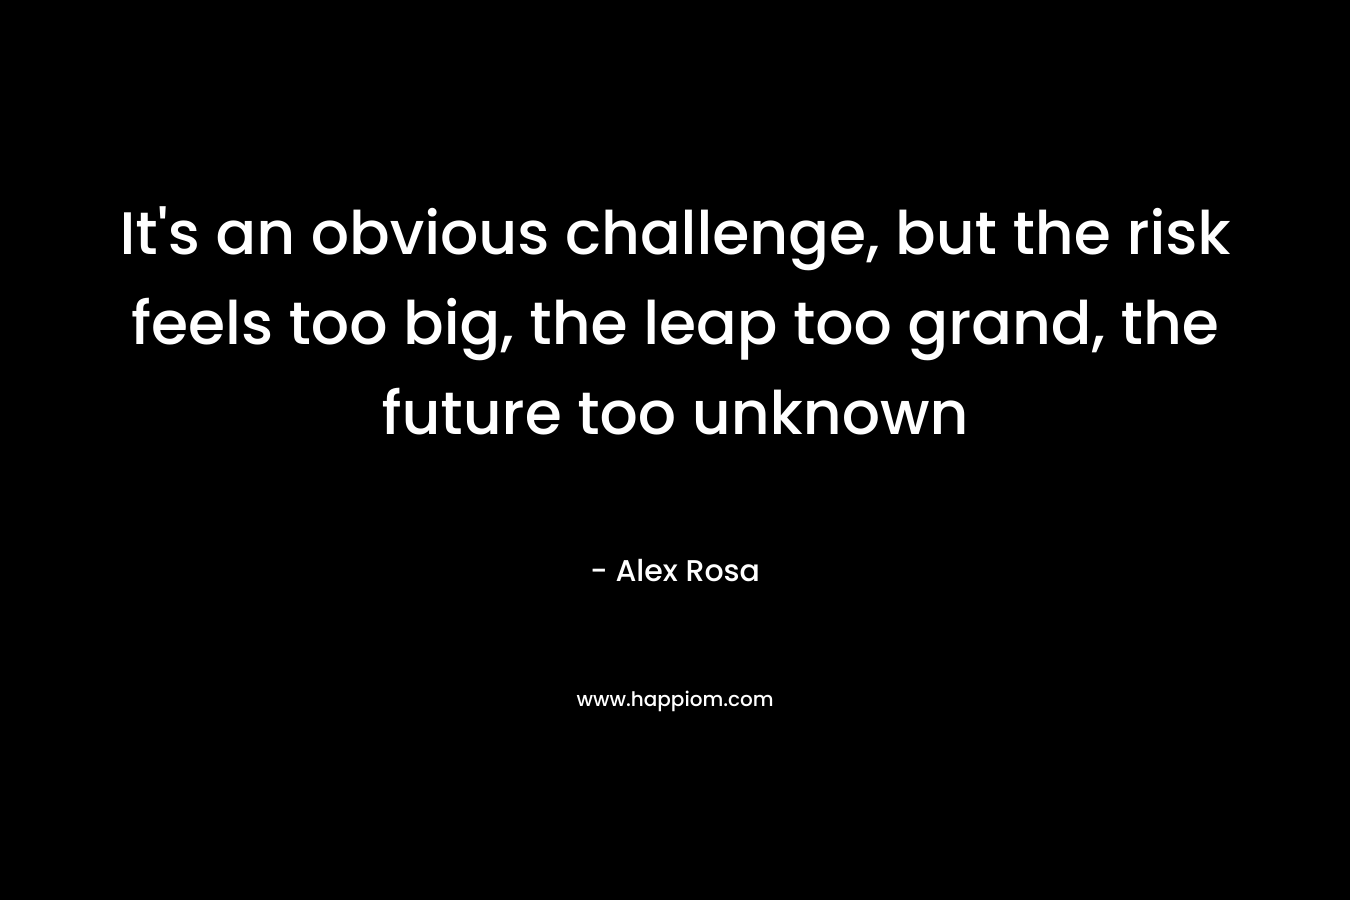 It's an obvious challenge, but the risk feels too big, the leap too grand, the future too unknown